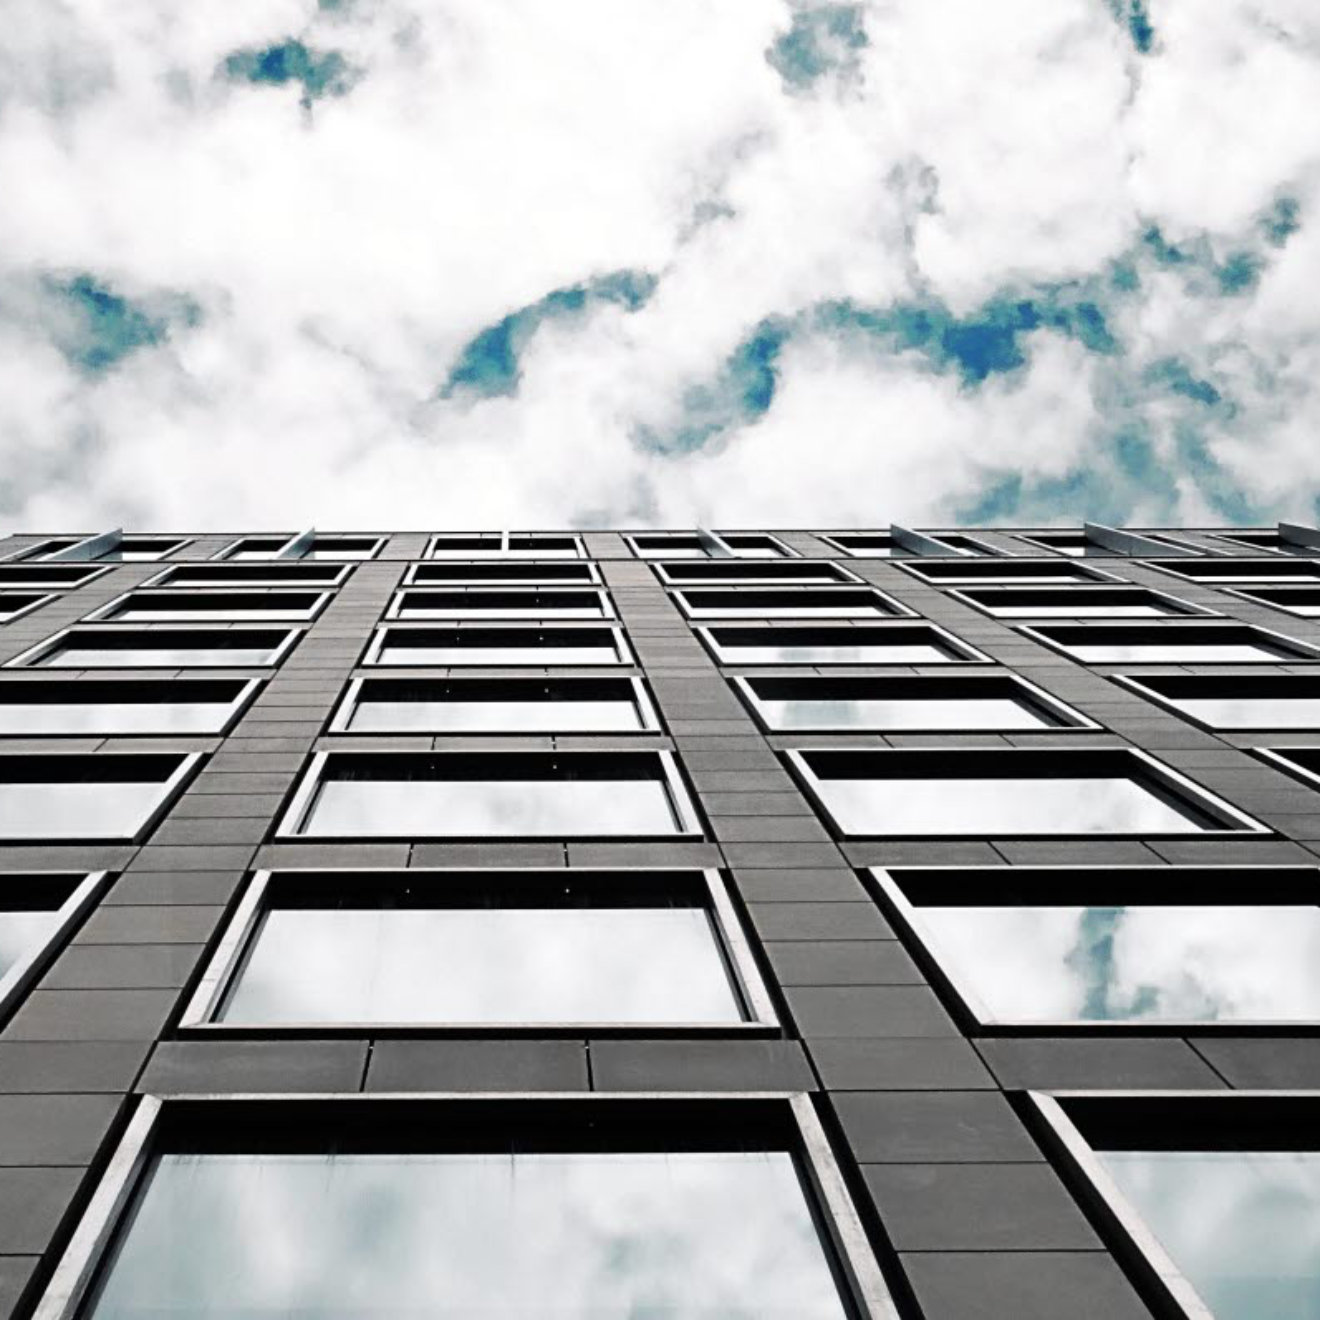 A photograph of the external wall of a high rise office taken from a worms-eye view